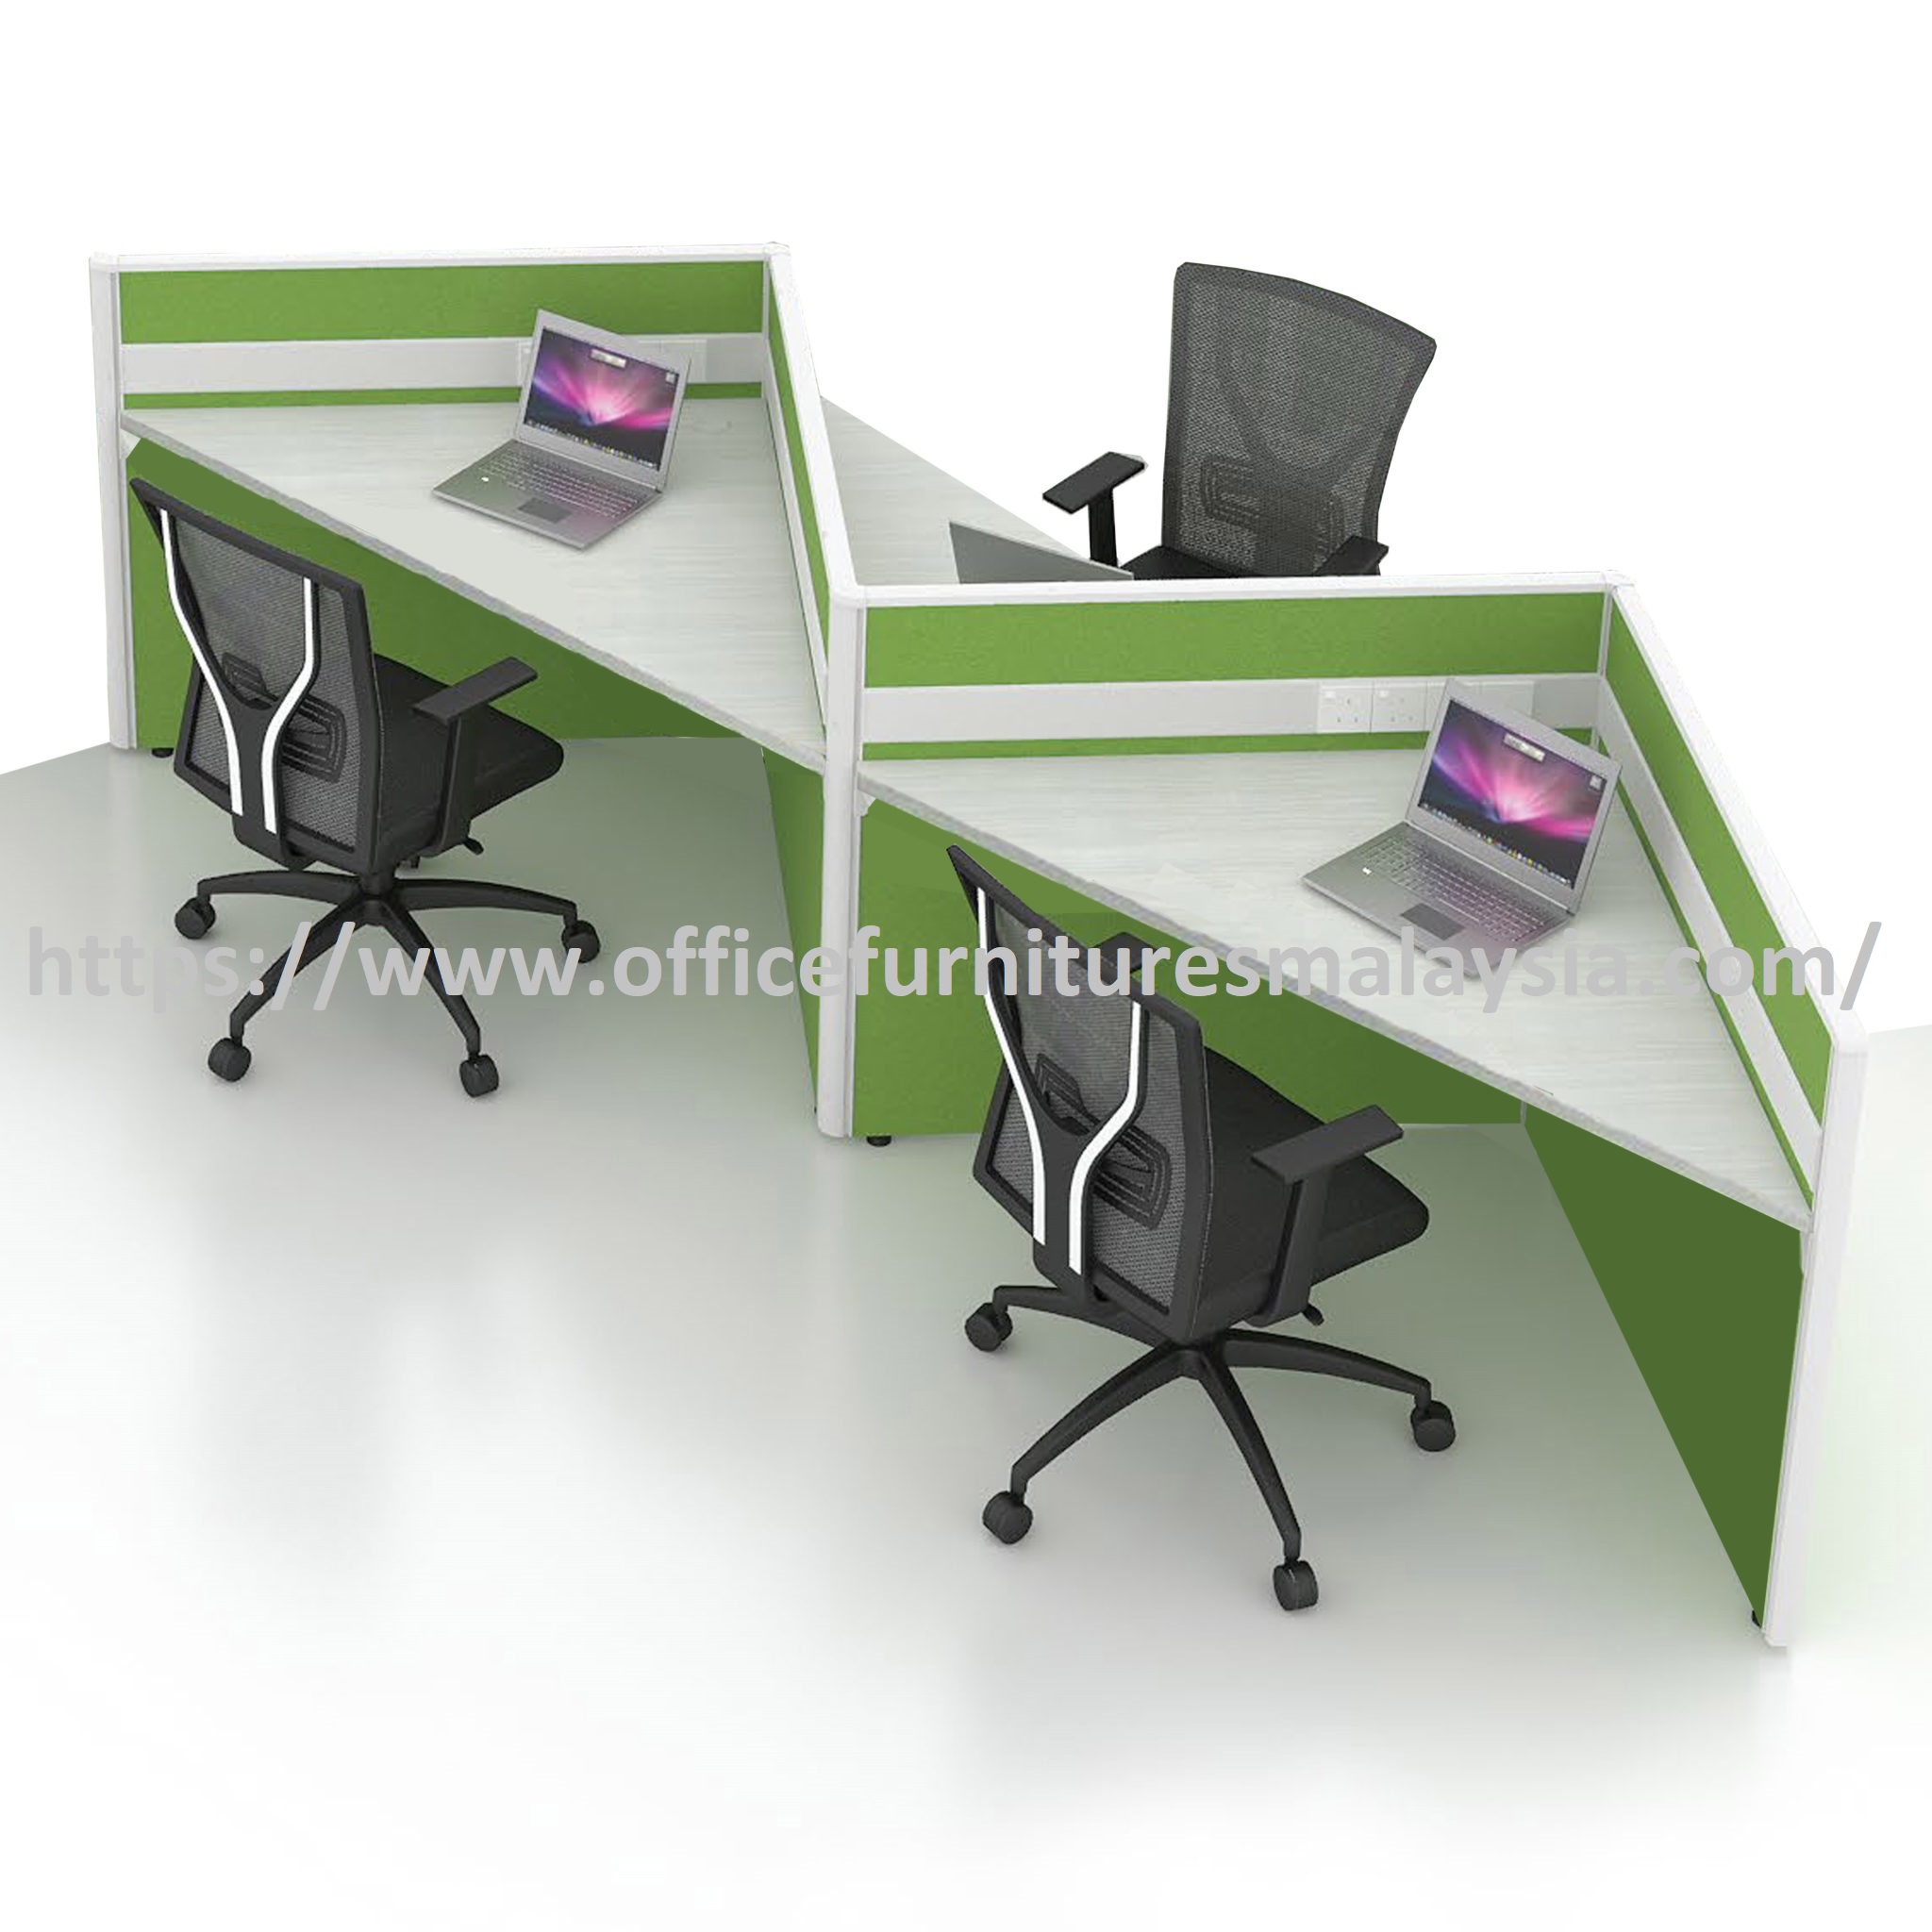 4 ft x 4 ft Glorious Triangle Modern Office Workspace 3 Seater